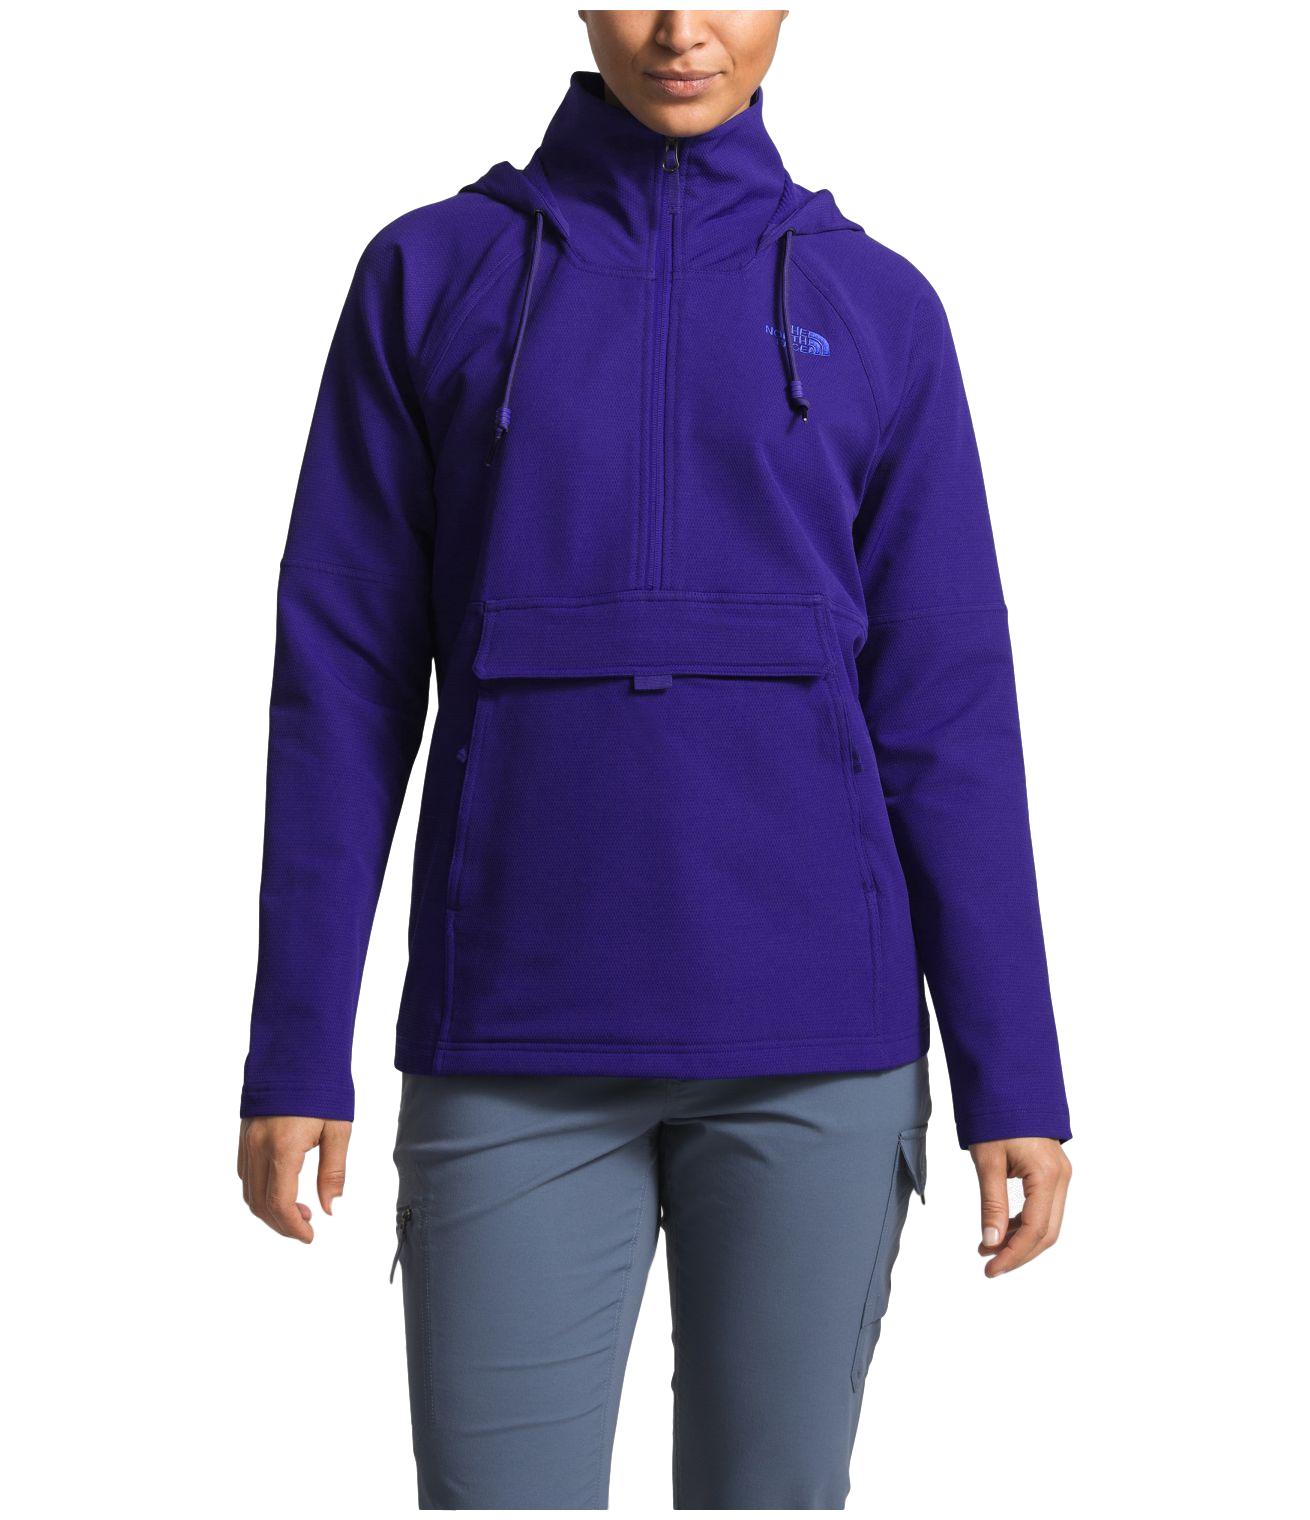 north face tekno hoodie